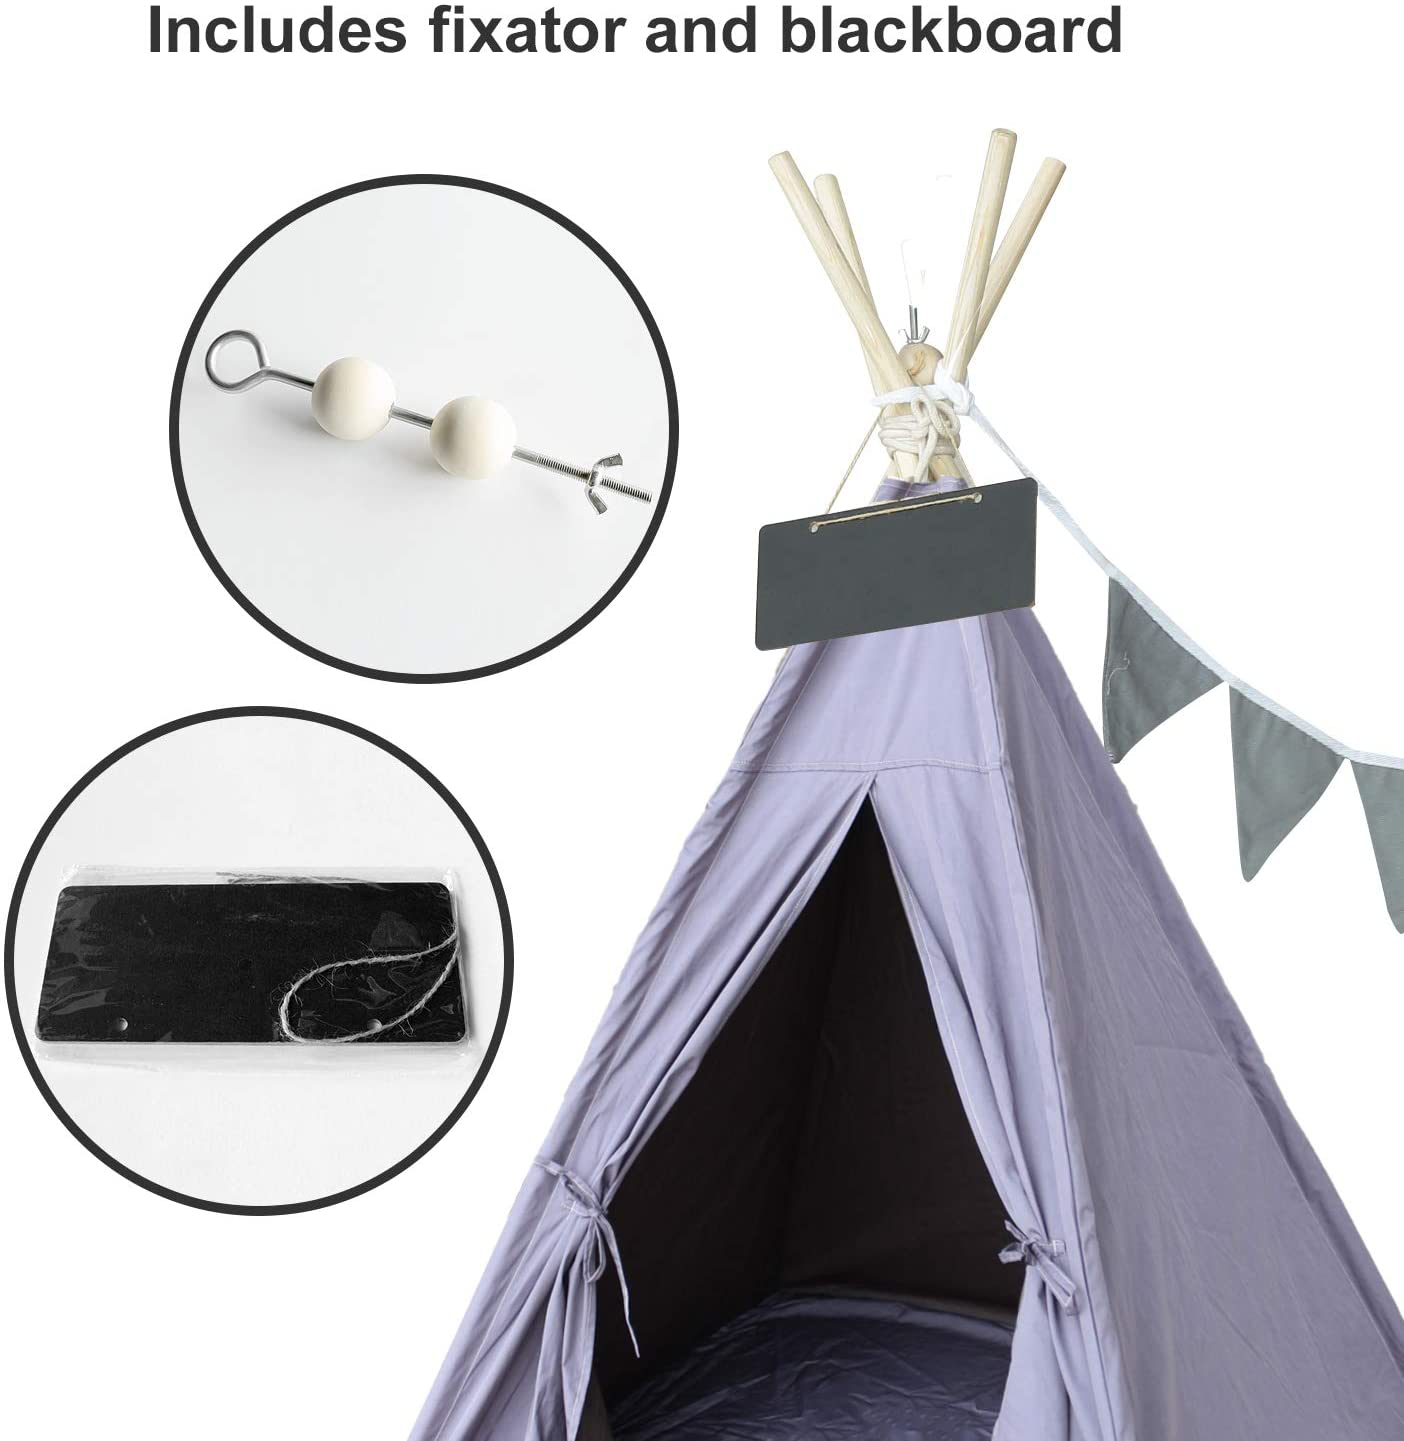 Ukadou Dog Teepee Medium for Pet Teepee Dog Tents for Large Dogs, 36Inch Pet Teepee with Floor Mat, Portable Dog House with Fixator and Blackboard Animals & Pet Supplies > Pet Supplies > Dog Supplies > Dog Houses Ukadou   